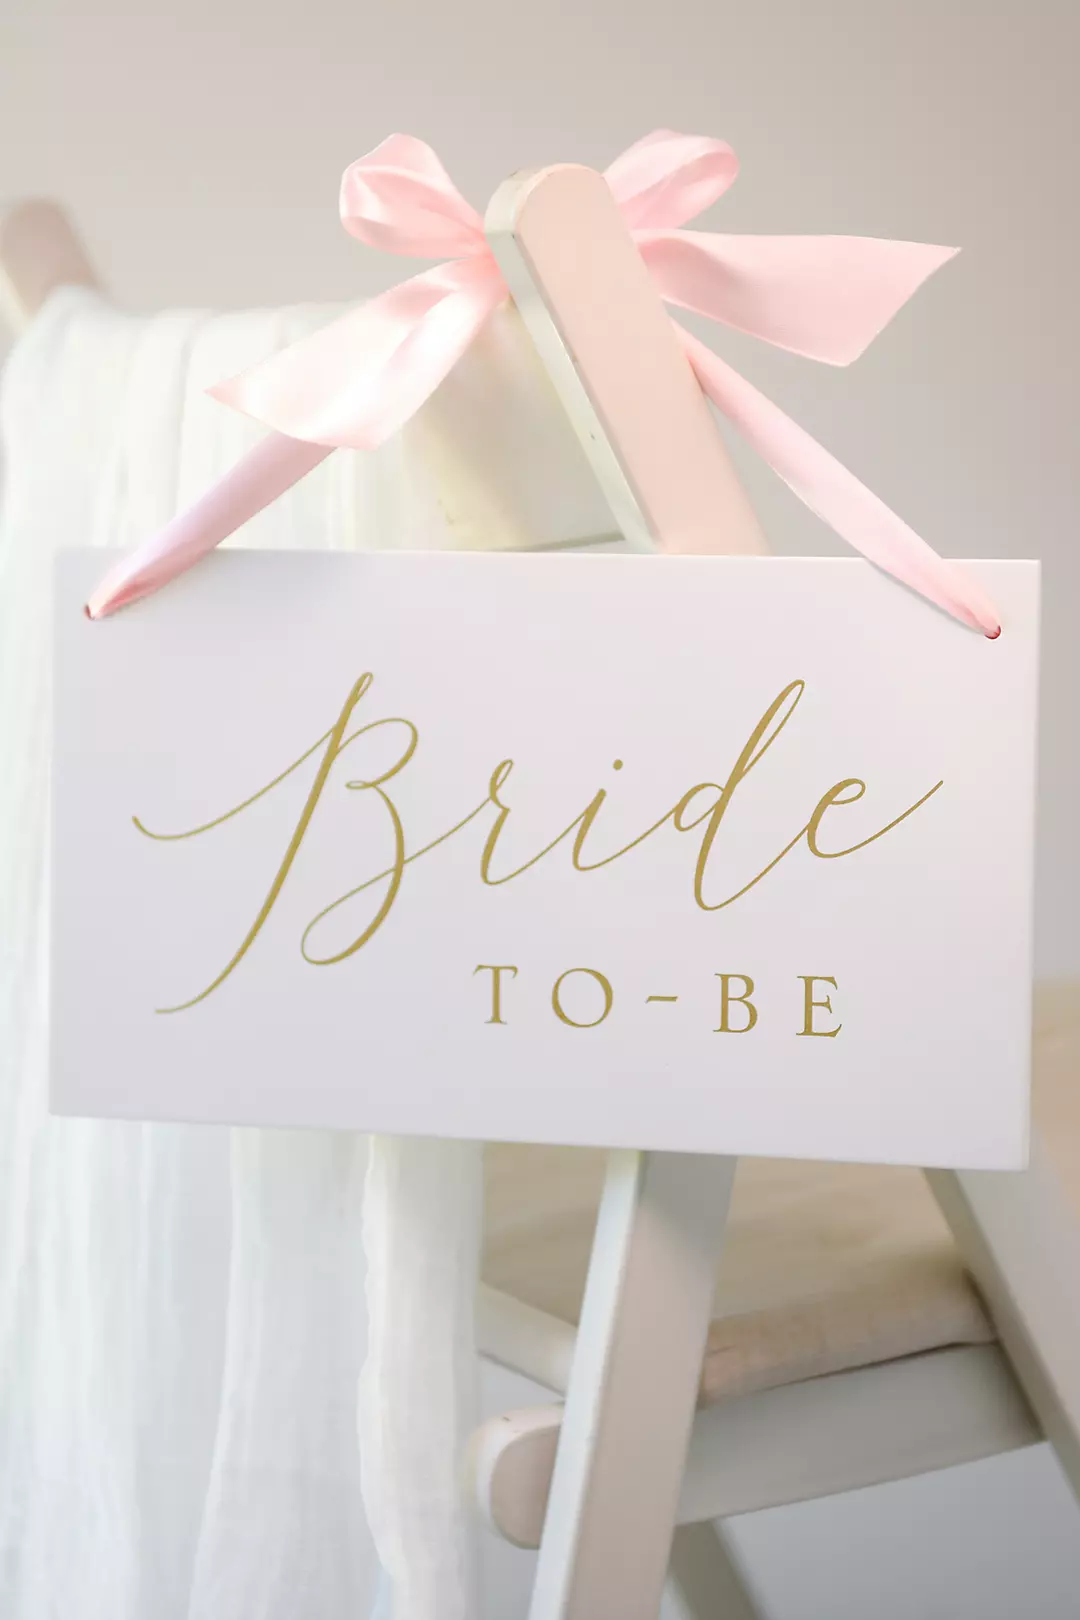 Bride To Be Wooden Sign with Ribbon Image